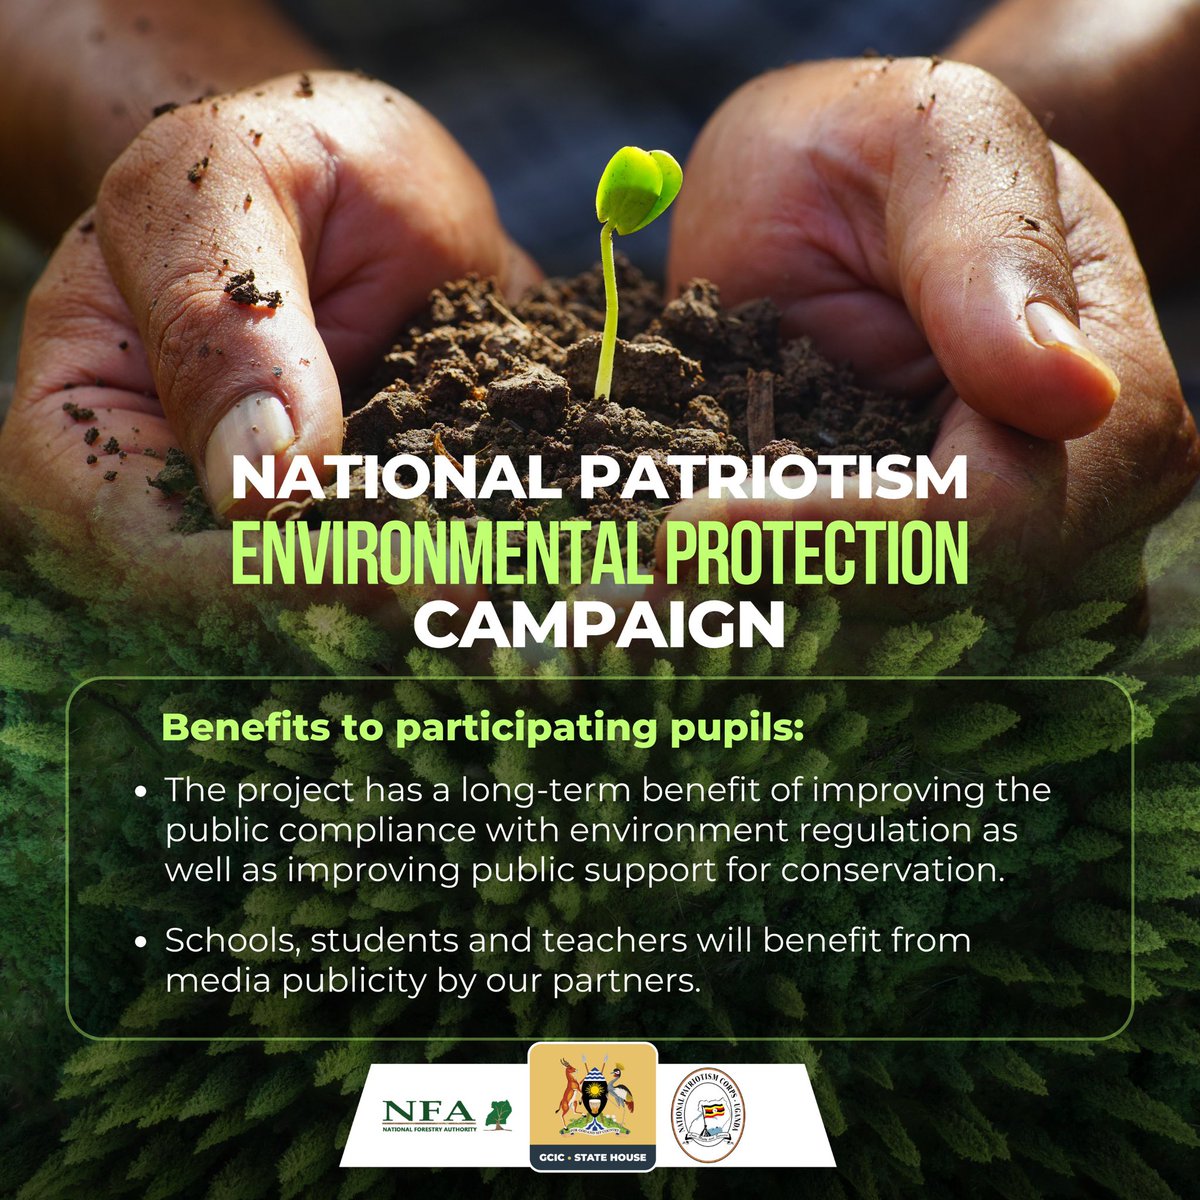 #EnviromentalProtection campaign will help improve pupils’ compliance with environment regulation as well as improving public support for conservation.